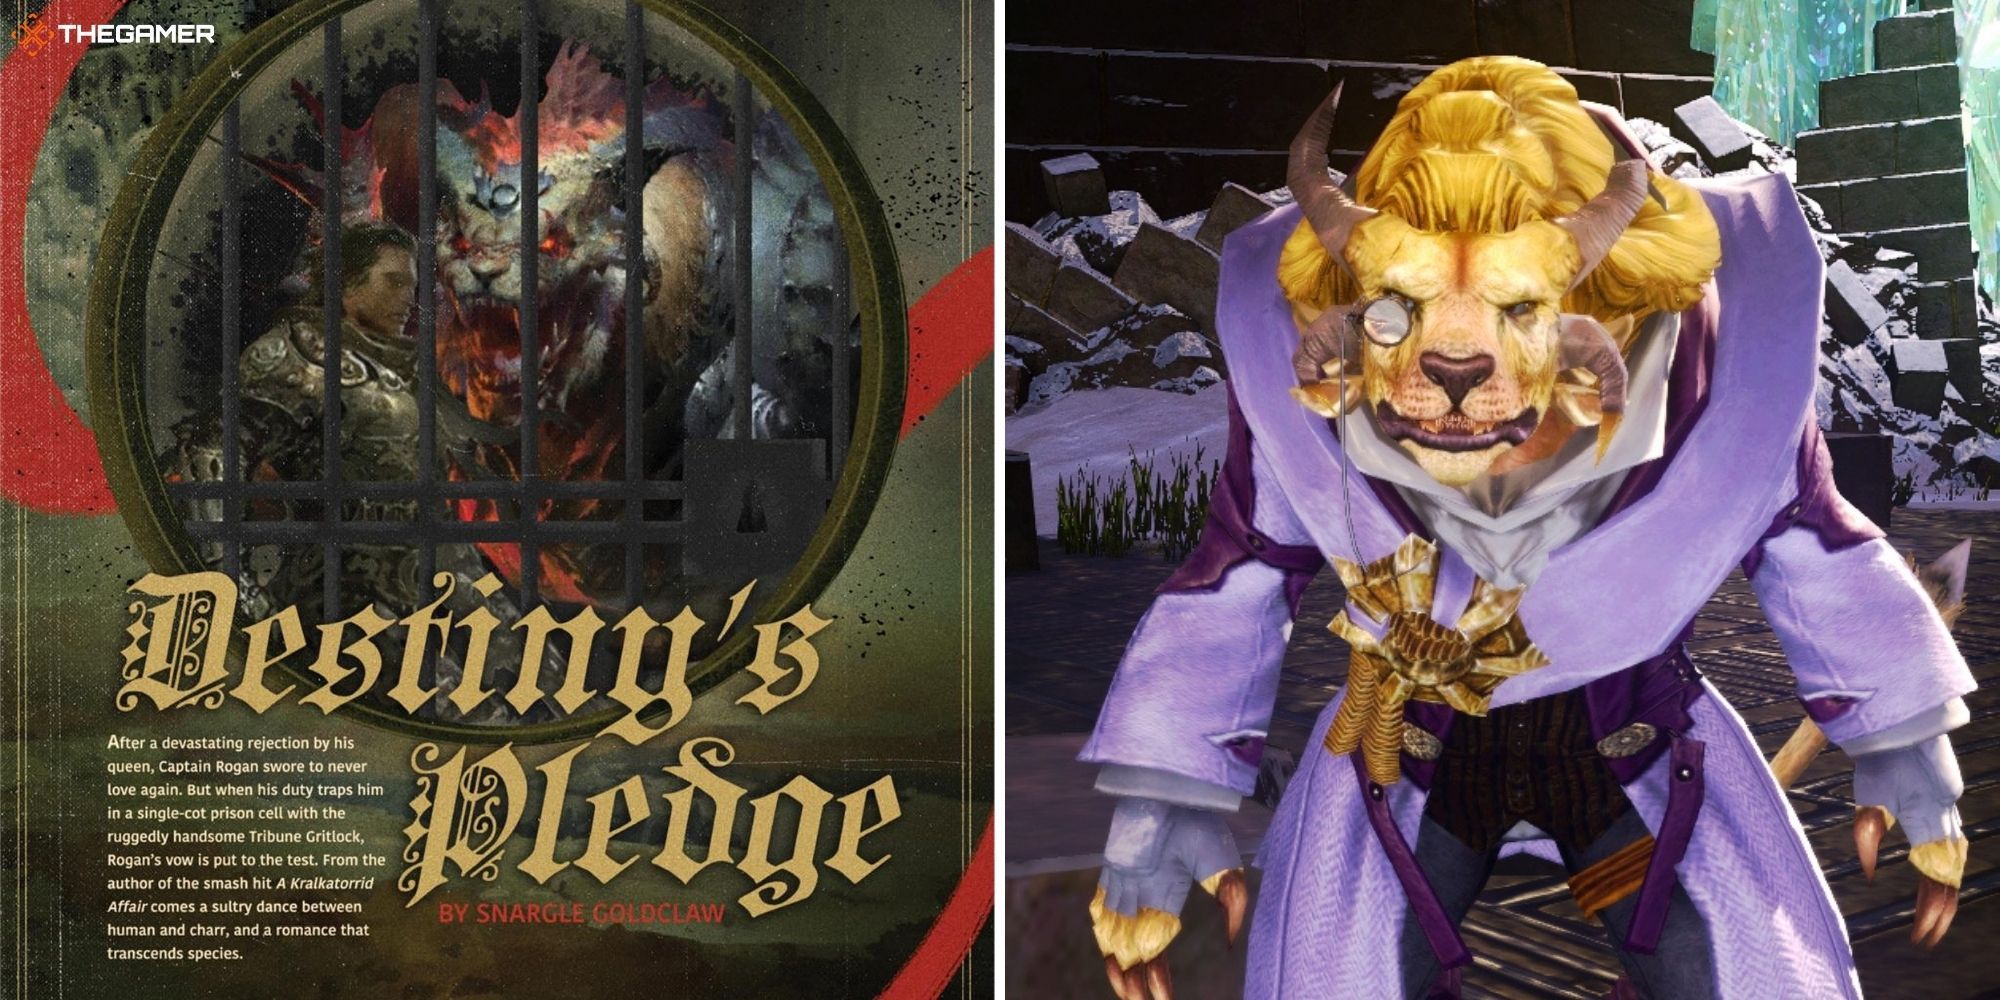 Guild Wars 2 End of Dragons - Destiny's Pledge cover on left, Snargle Goldclaw on right